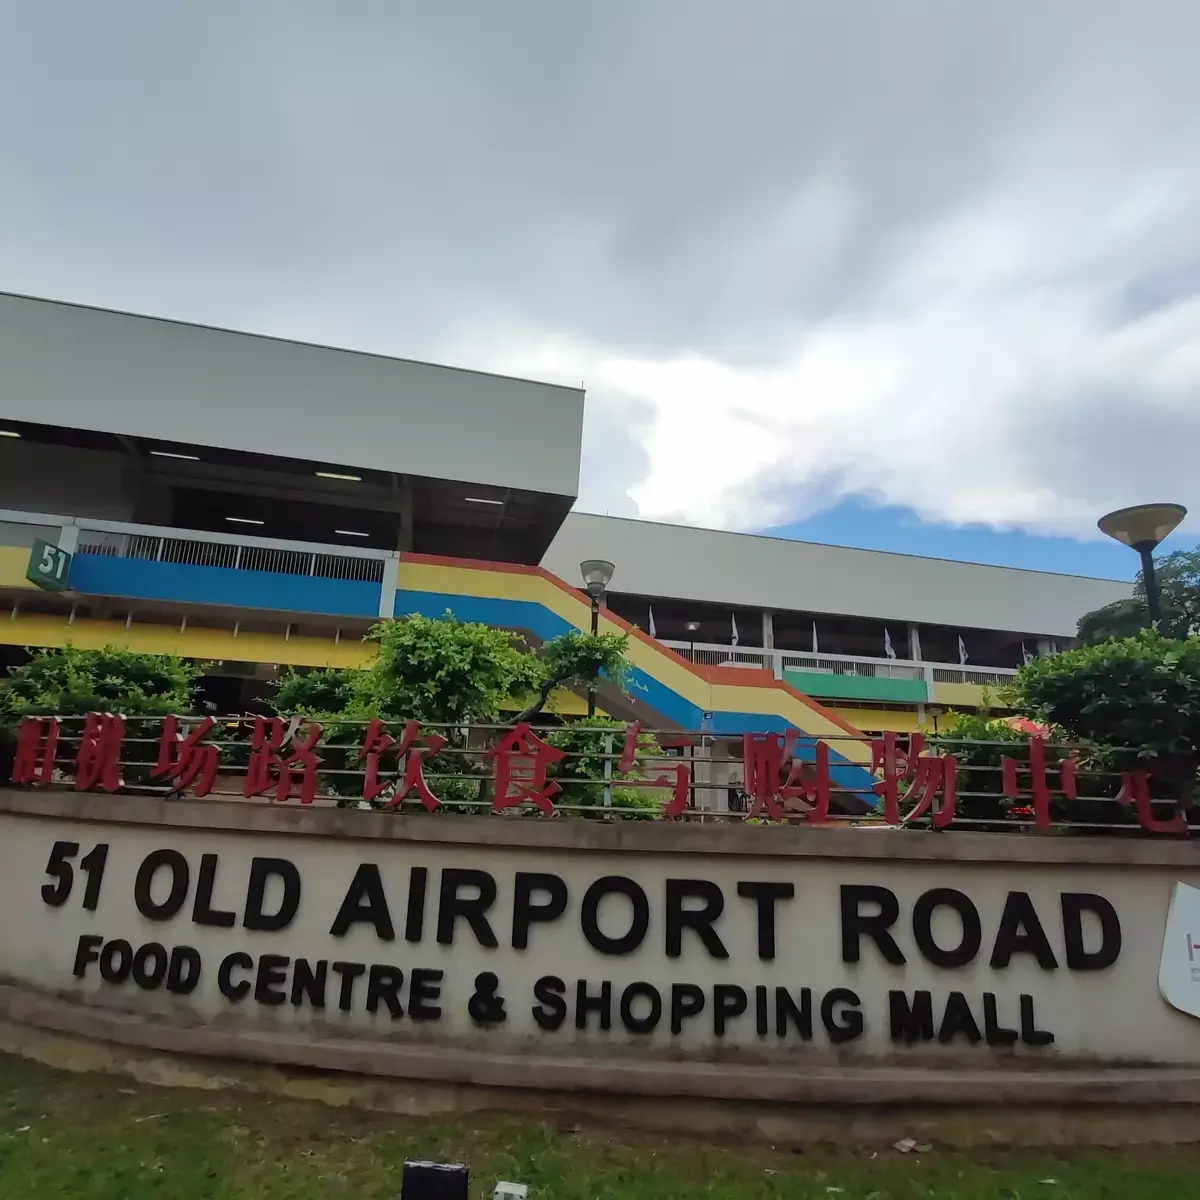 Guide: Old Airport Road Food Centre (Singapore)